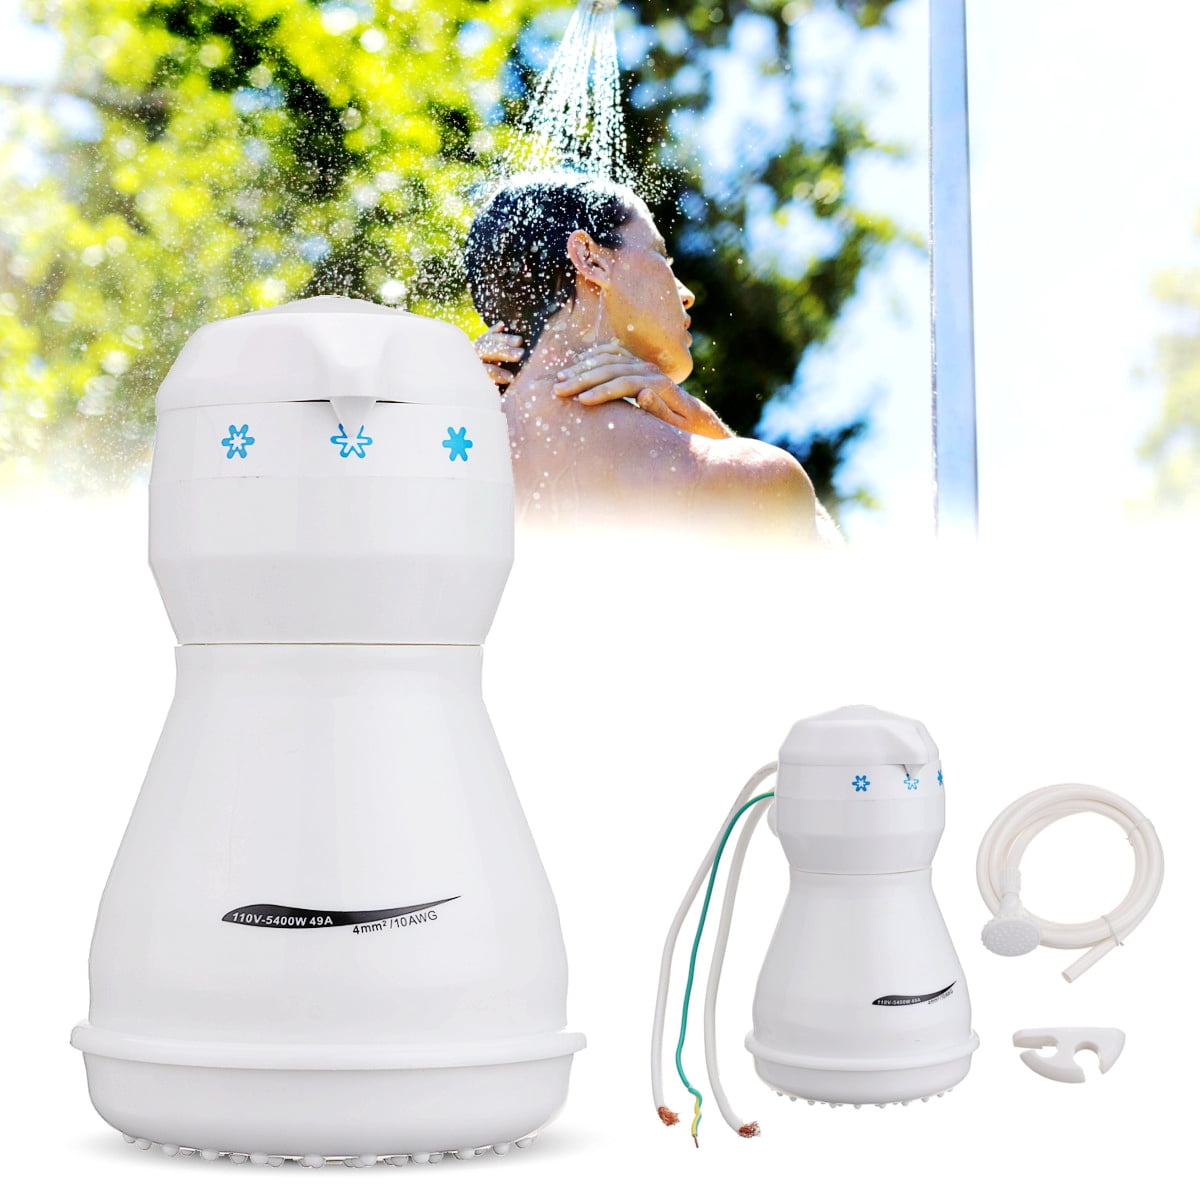 V Electric Shower Head Heater Automatic Electric Instant Hot Water Bath Shower Head Heater